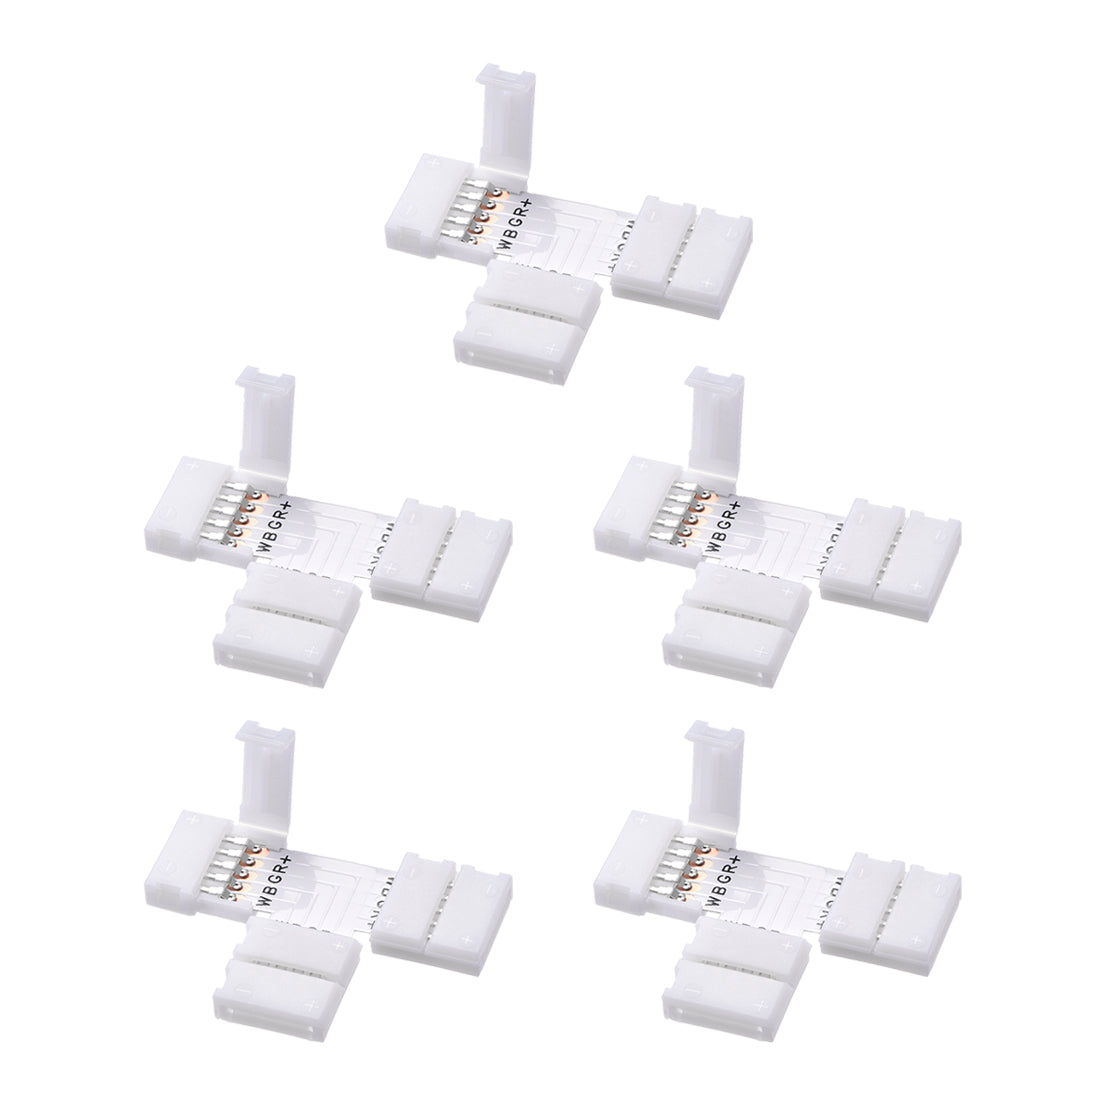 Uxcell Uxcell 12mm 5P LED Connector Solderless for 5050 RGBW Multicolor Light 20Pcs